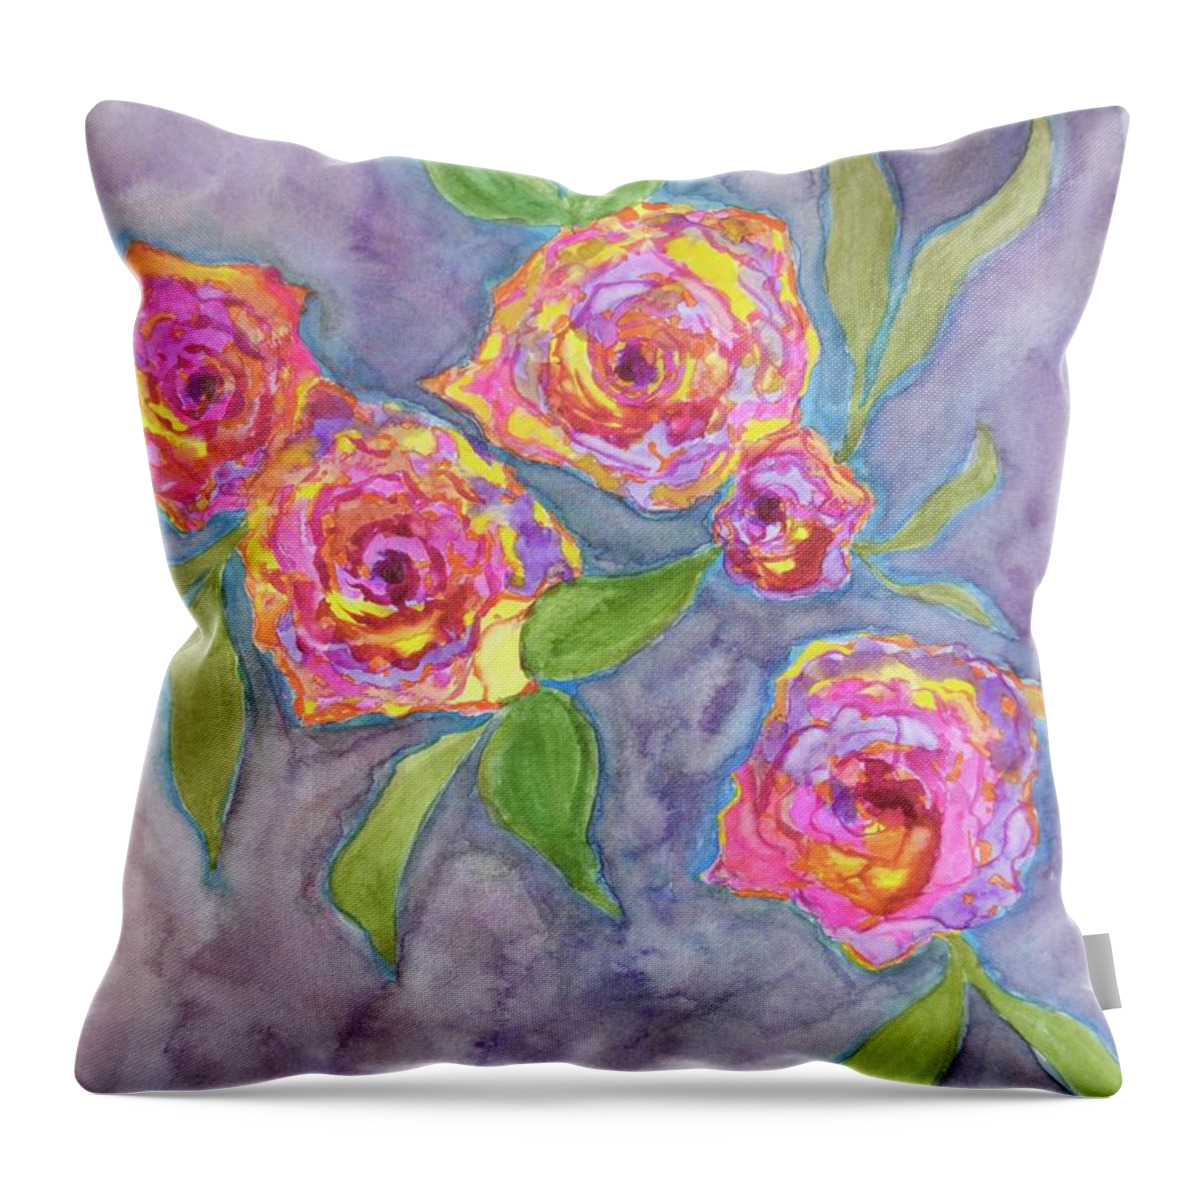  Throw Pillow featuring the painting Multifarious Roses by Barrie Stark